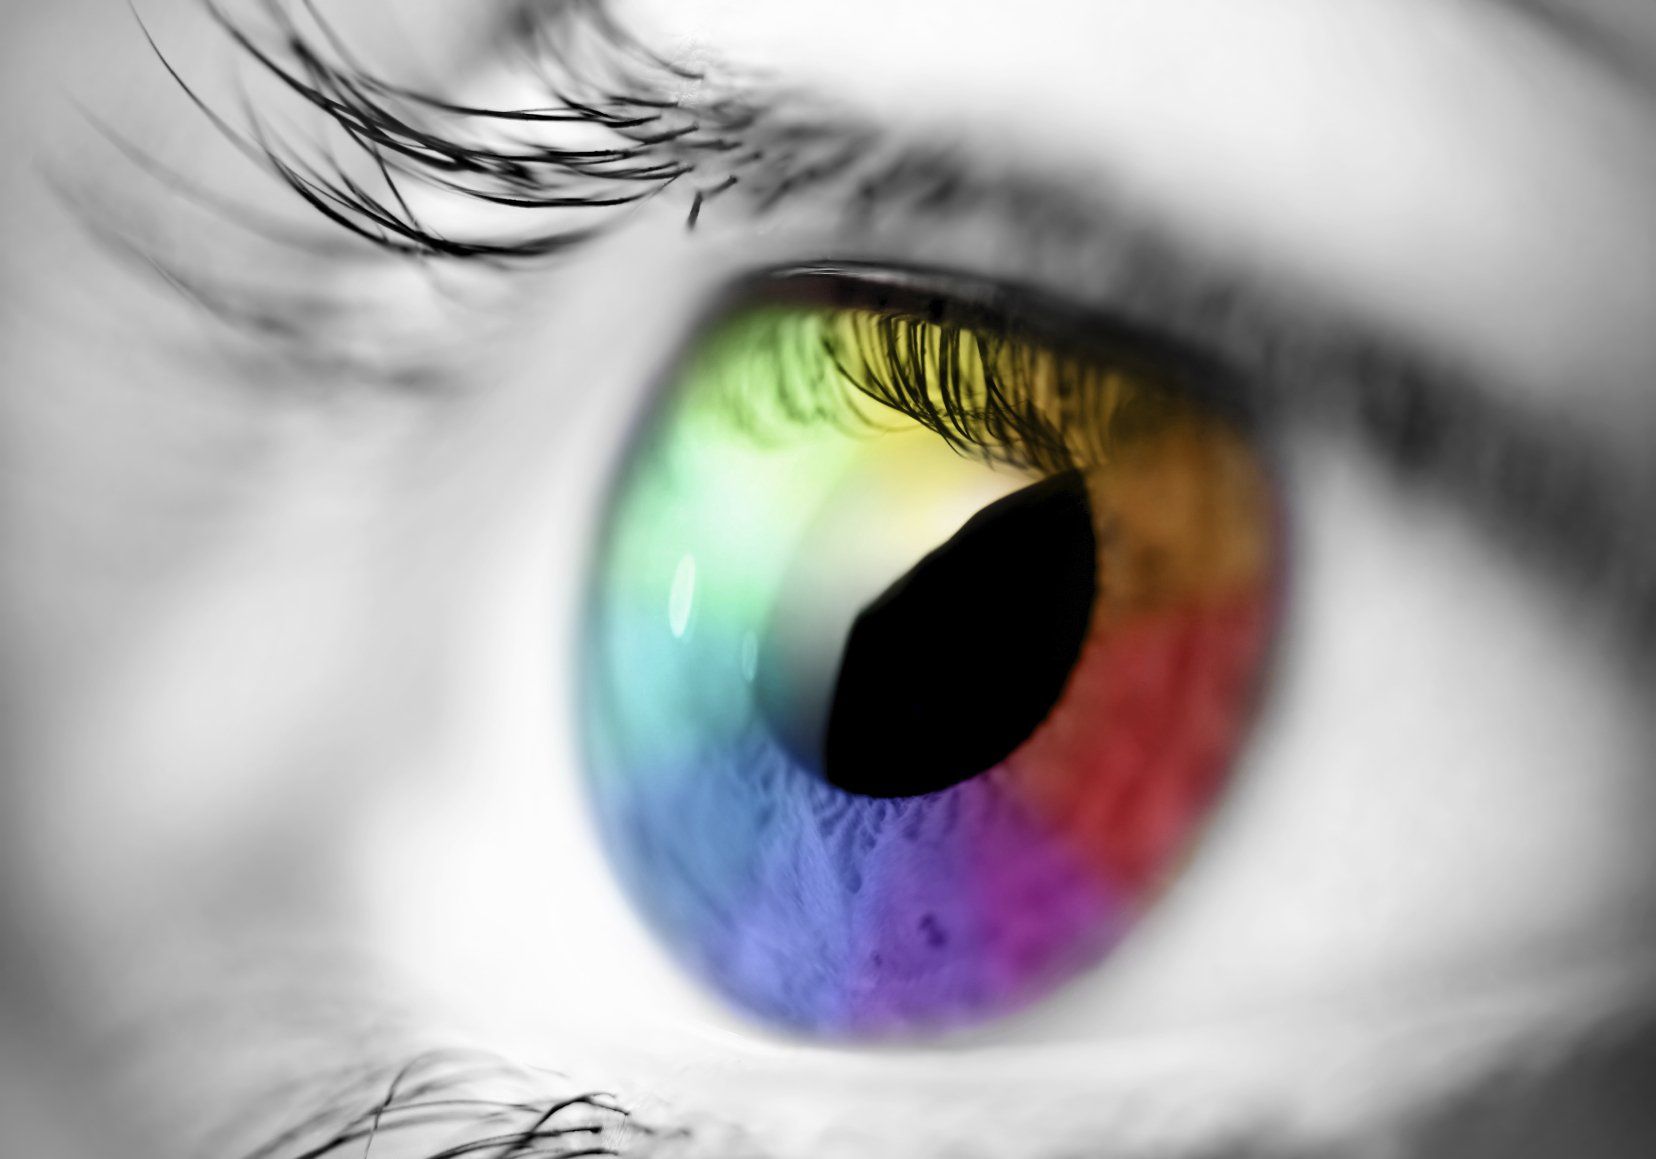 A close up photograph of a human eye. All is black and white except for the iris which is rainbow.